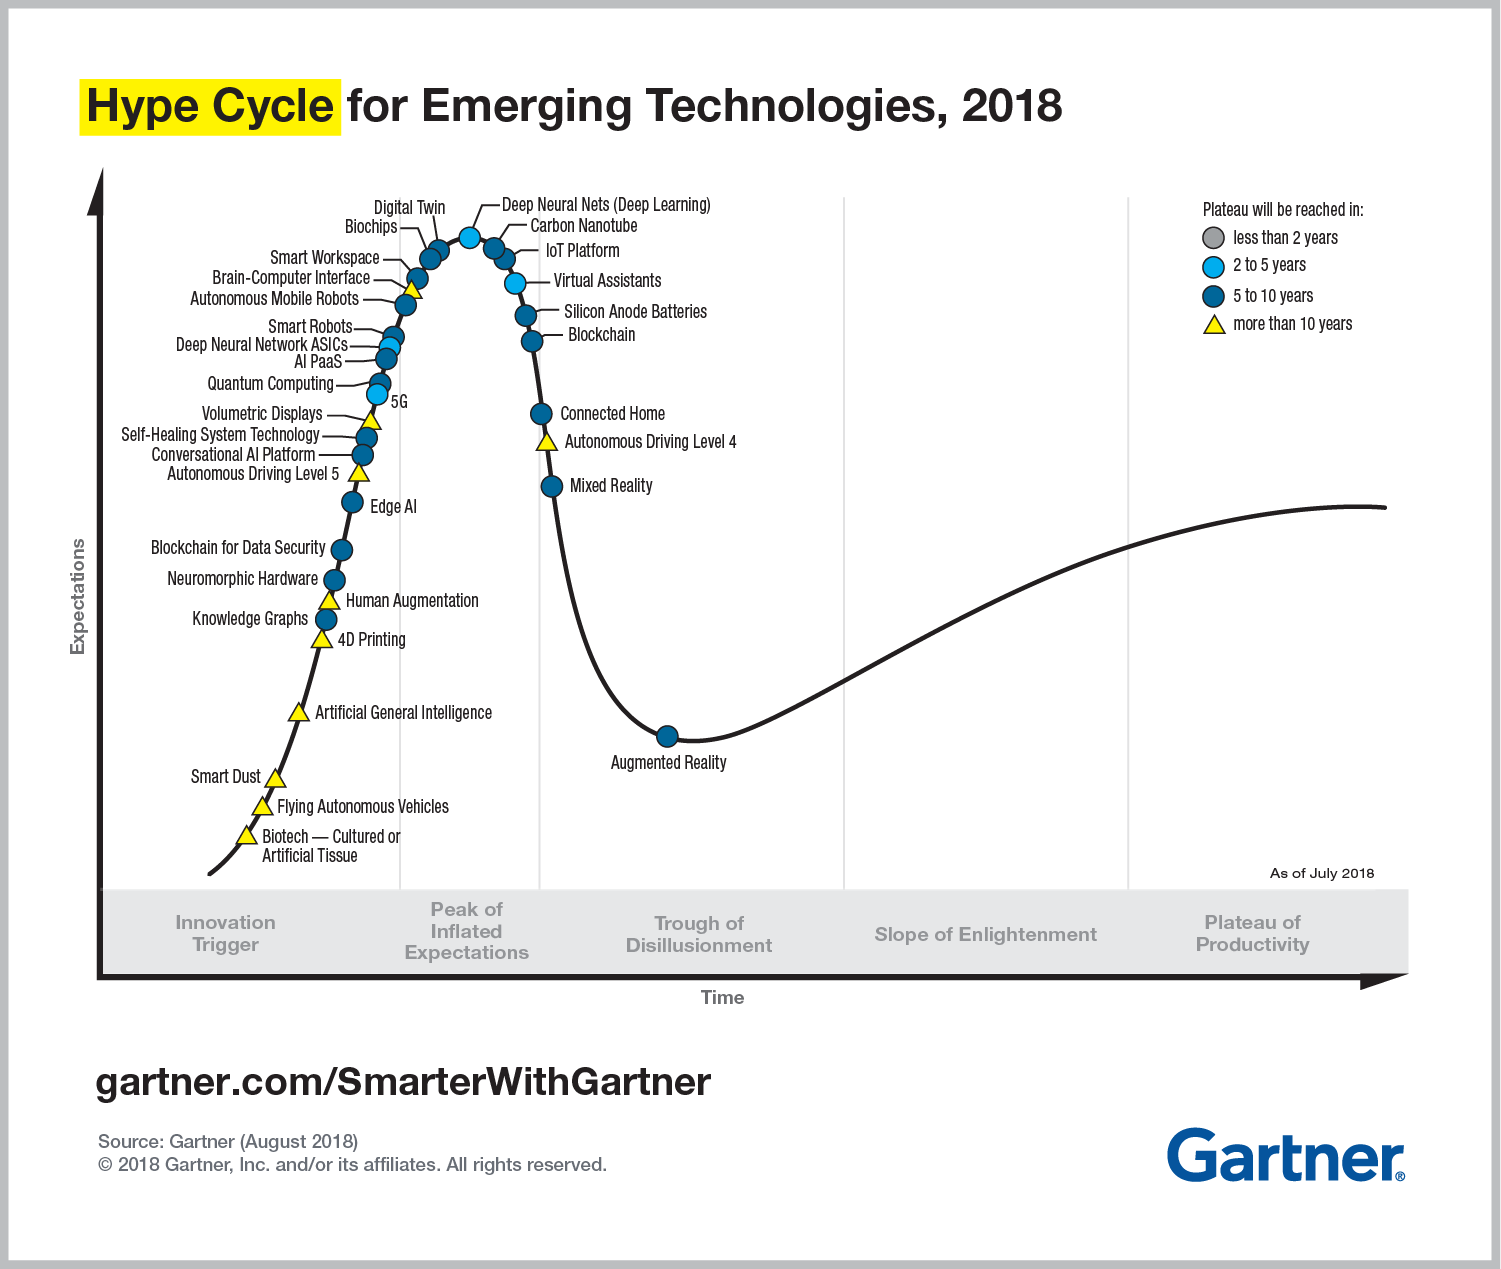 Hype Cycle for Emerging Technologies, 2018